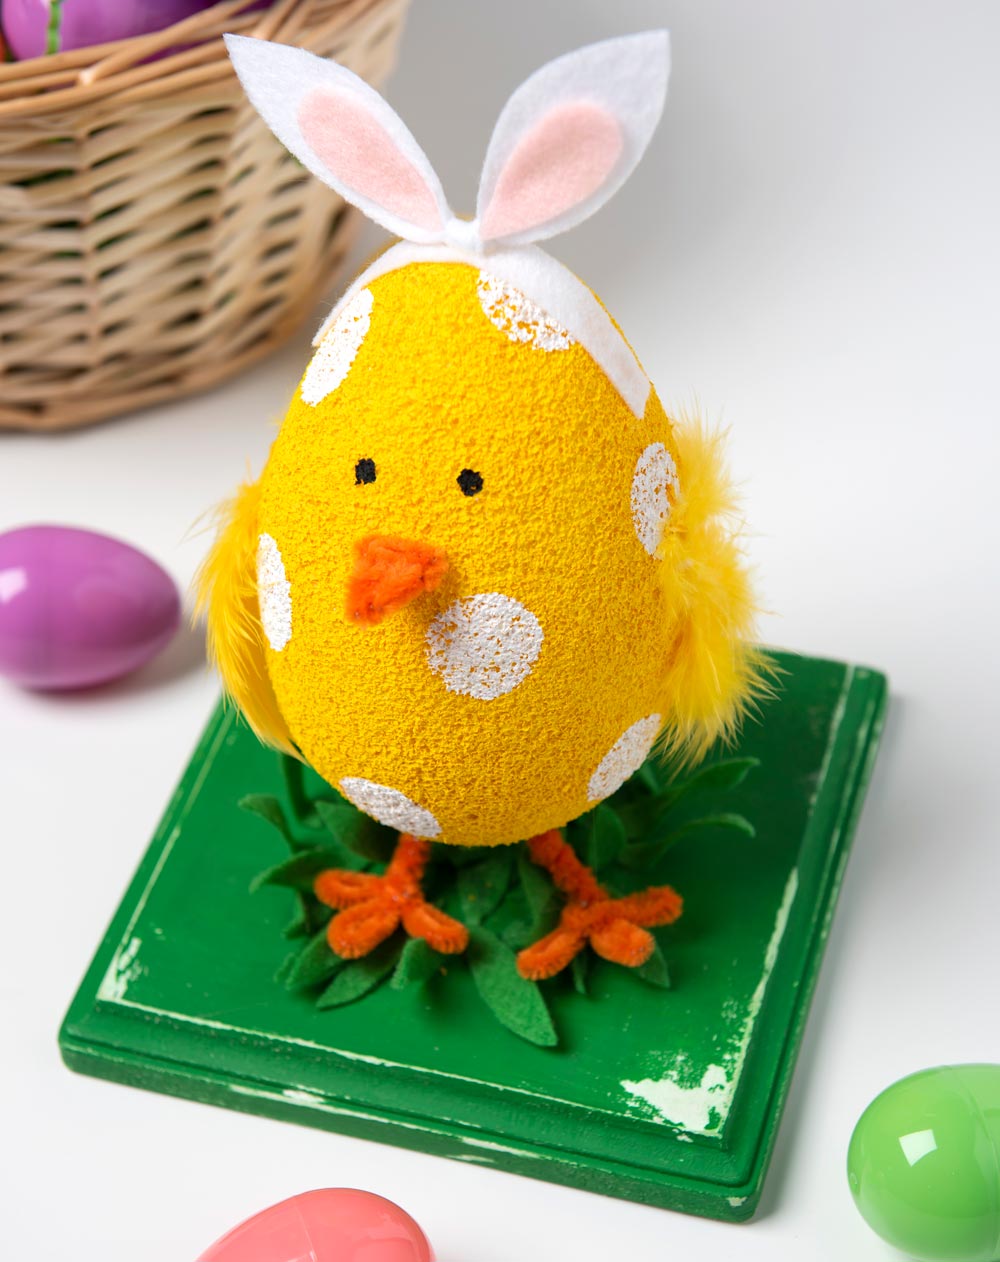 FA_Easter_bty_Chick_030819.jpg